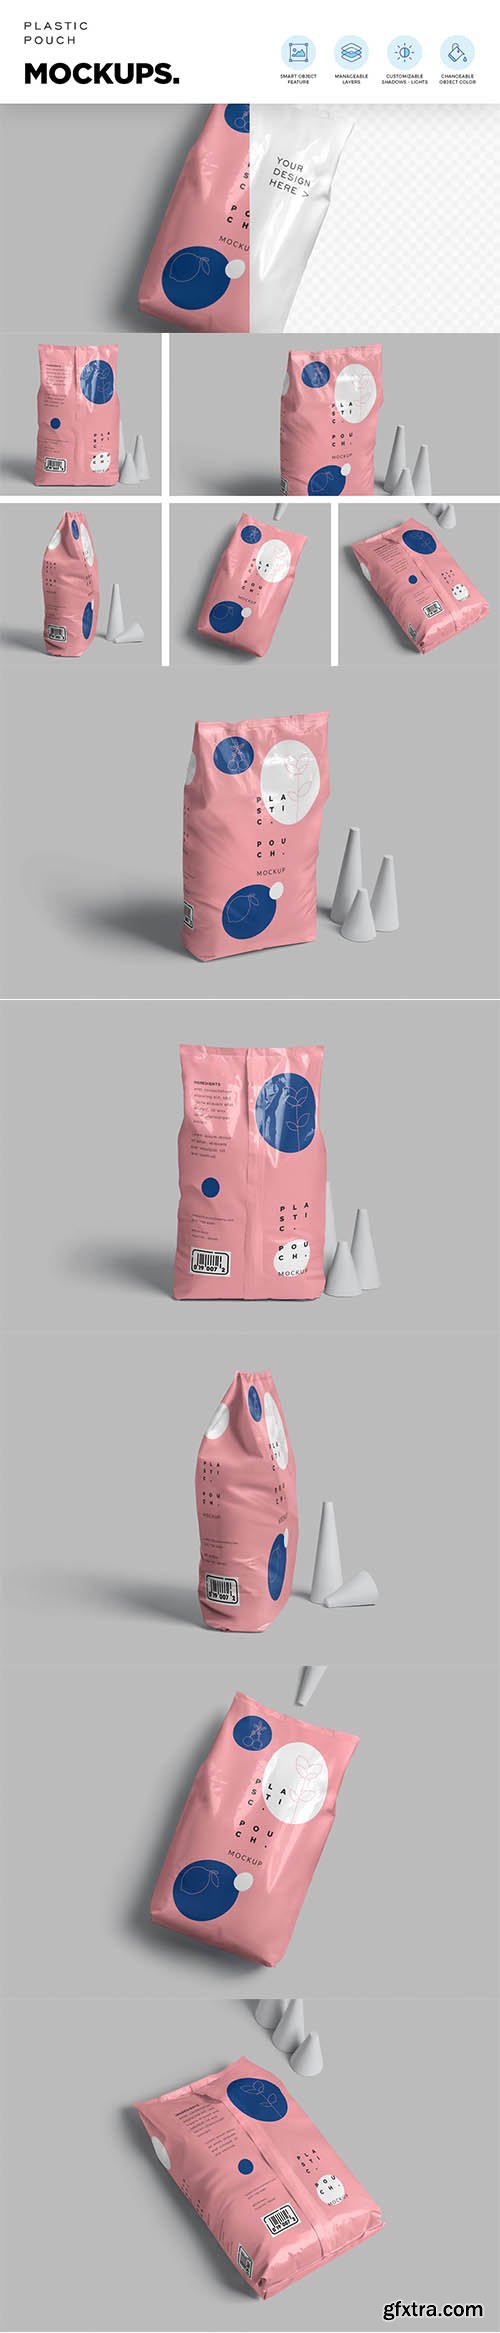 CreativeMarket - Plastic Packaging Pouch Mockups 6859933